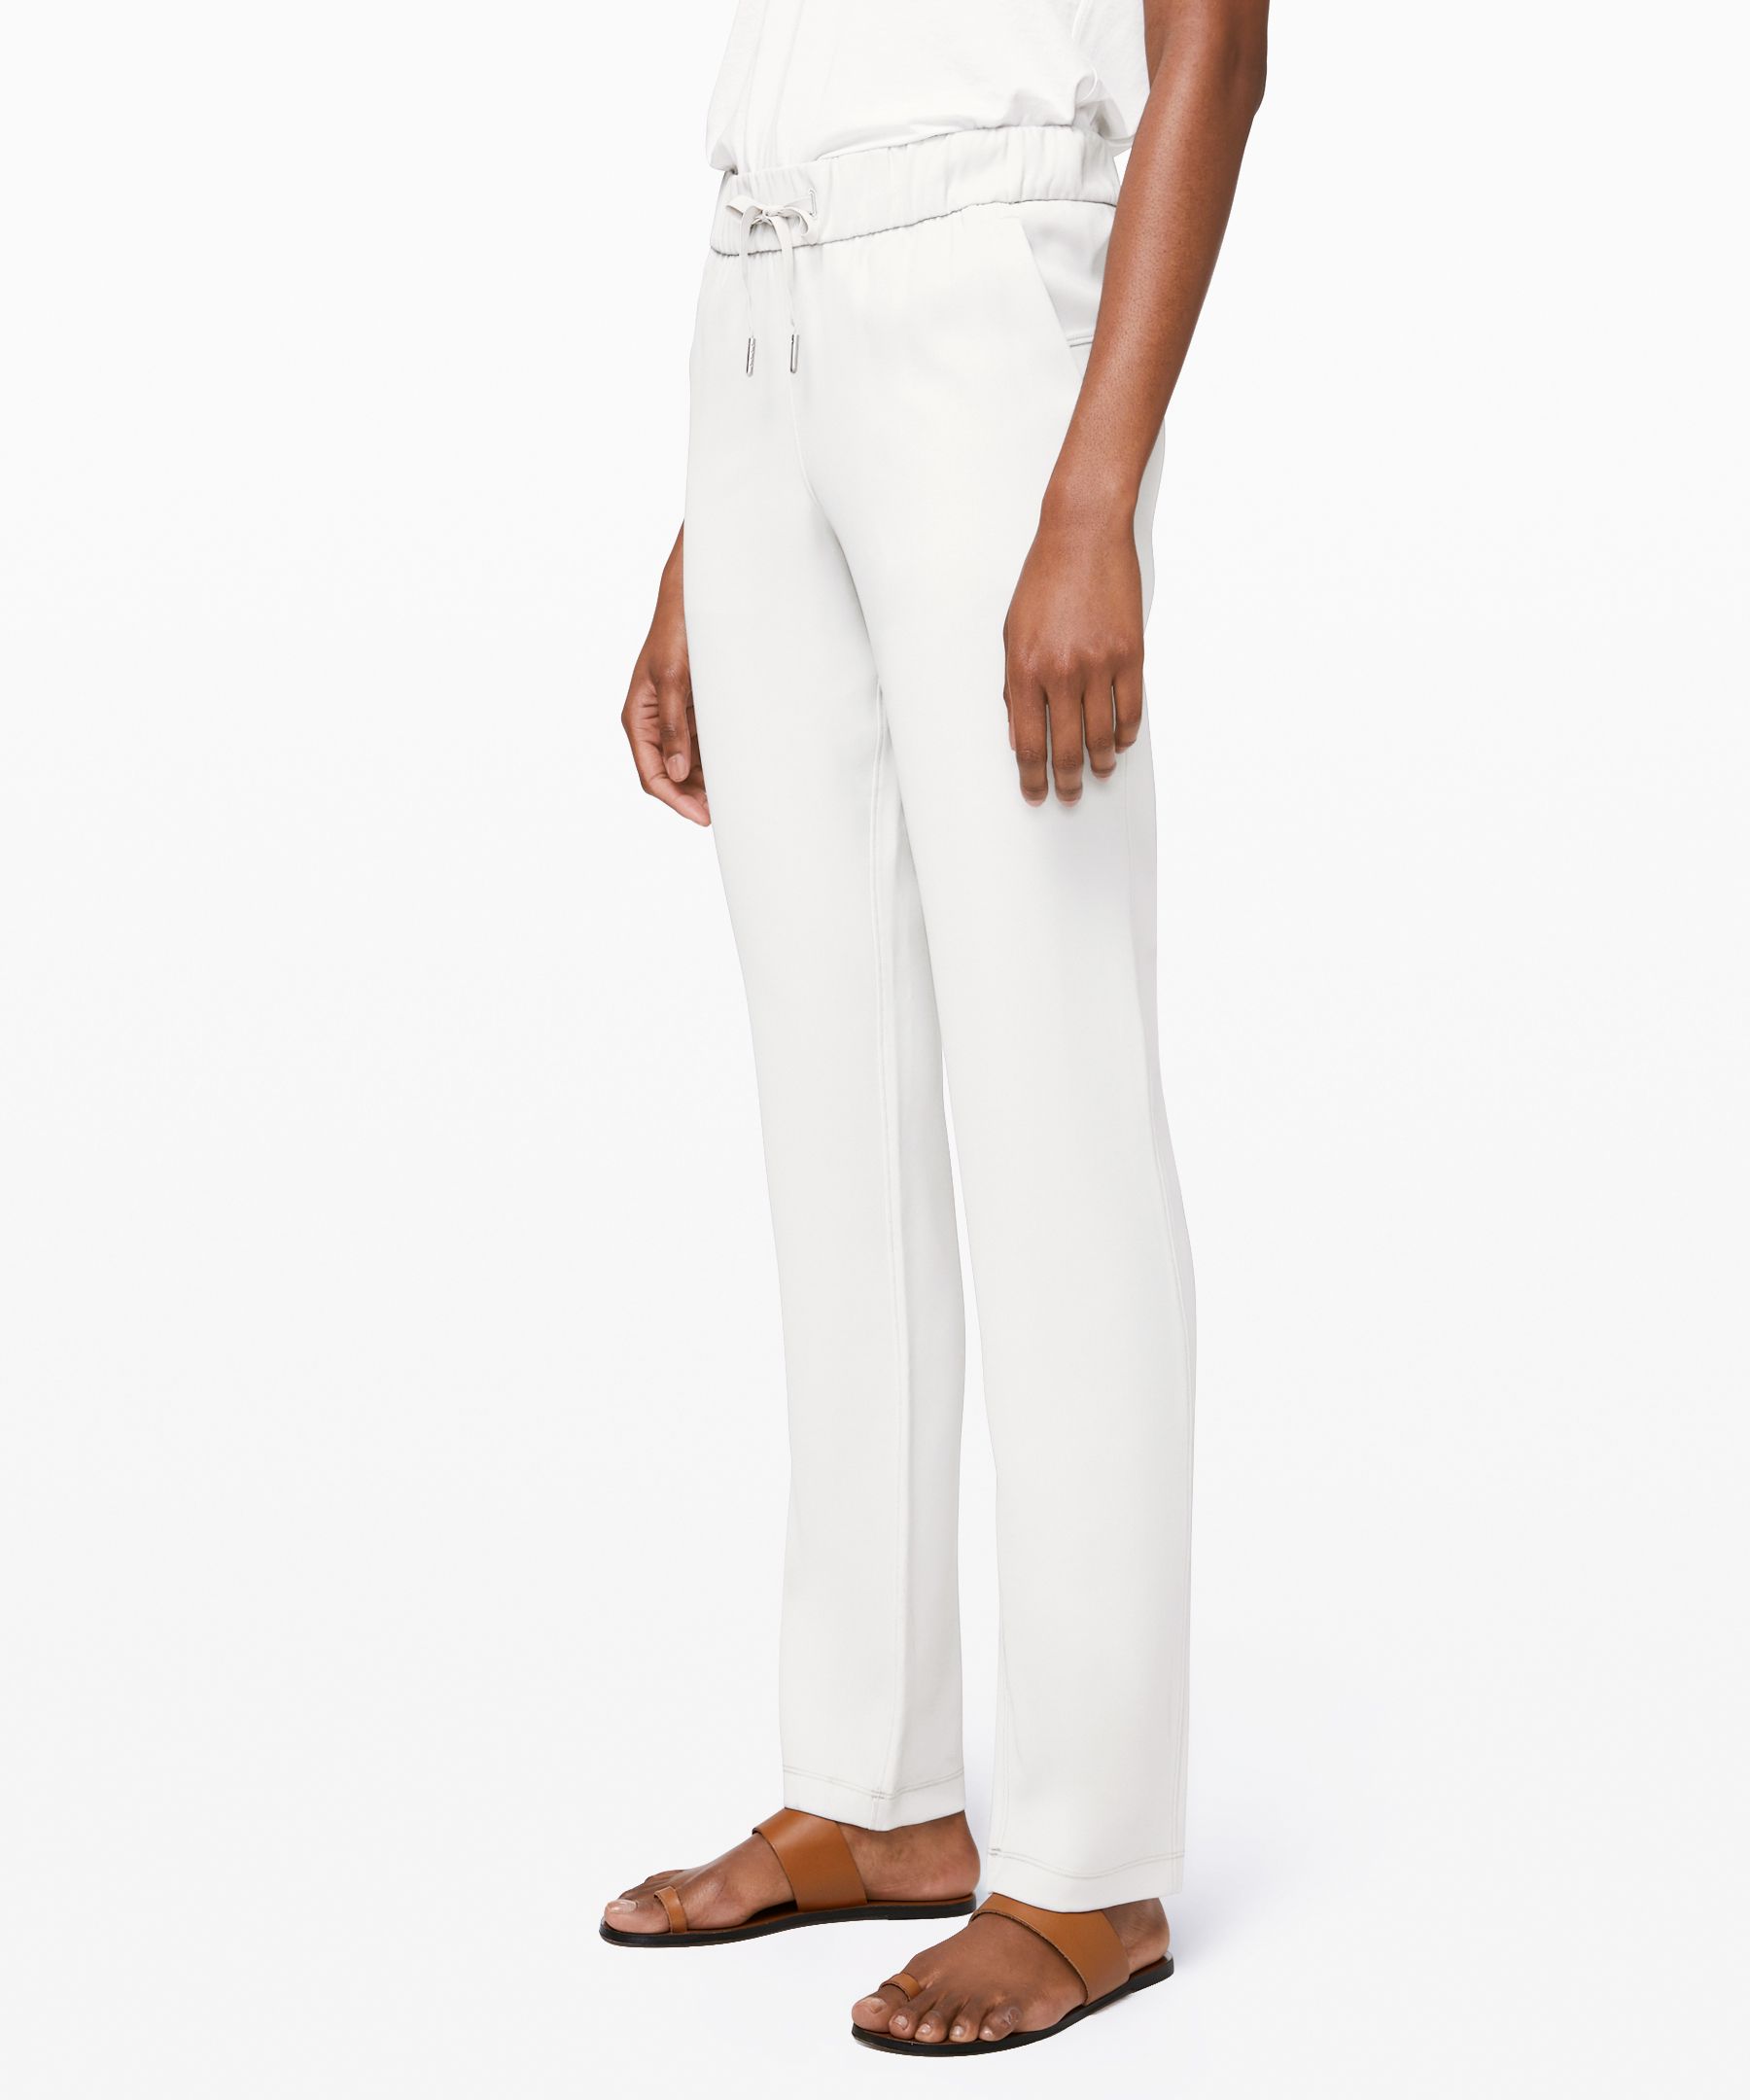 Lululemon On The Fly Pant *online Only Woven Tall In Silverstone